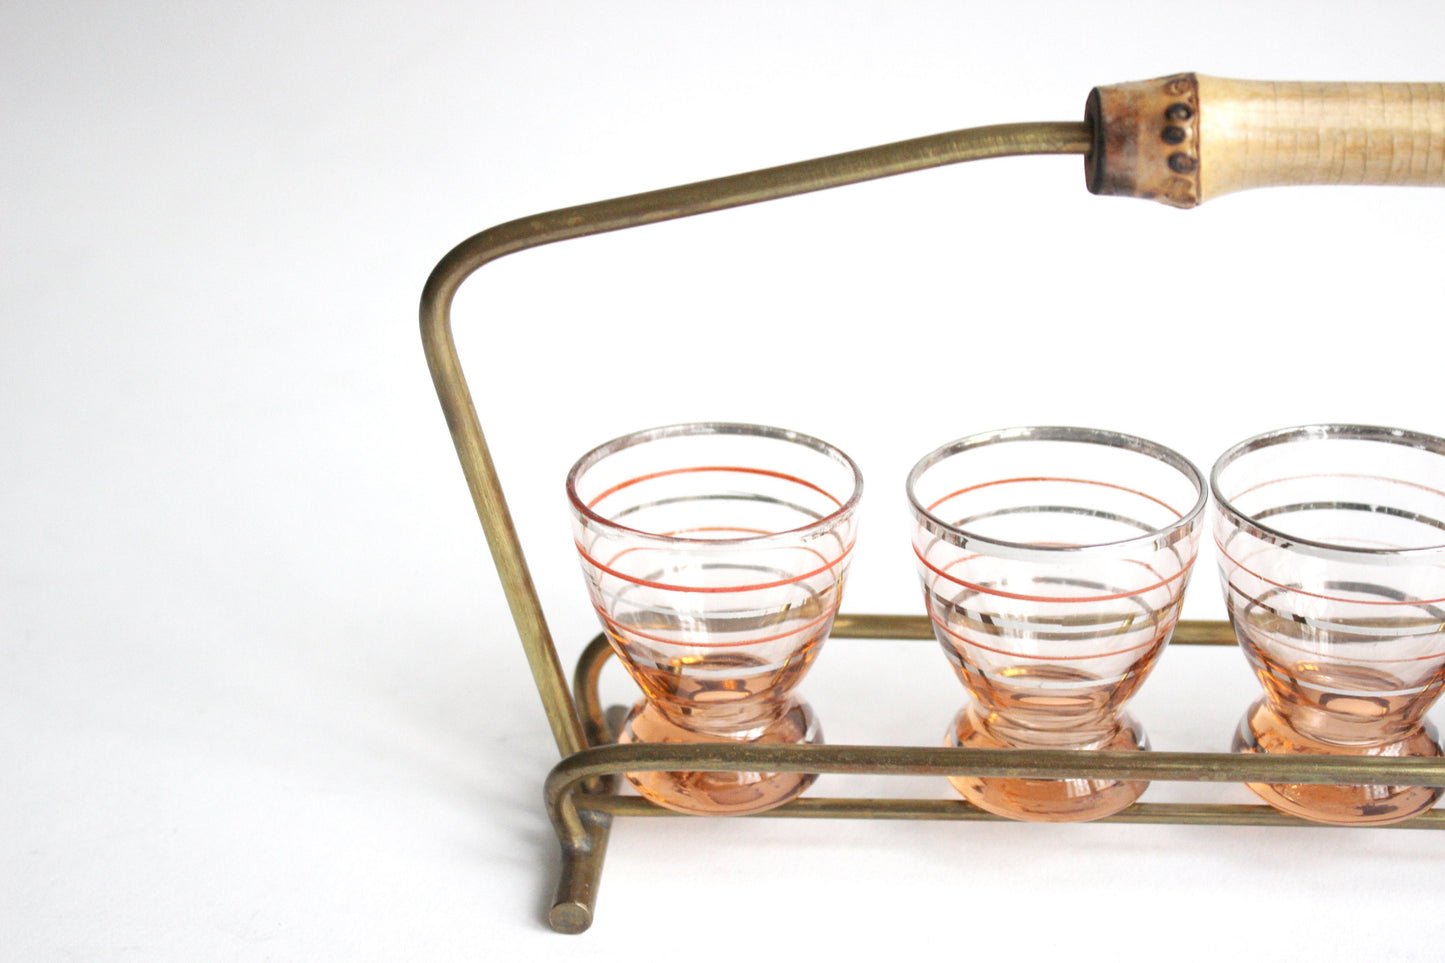 Shot Glass Set of 5 in Brass Holder with bamboo handle 1950s. Mid-Century design. Austria